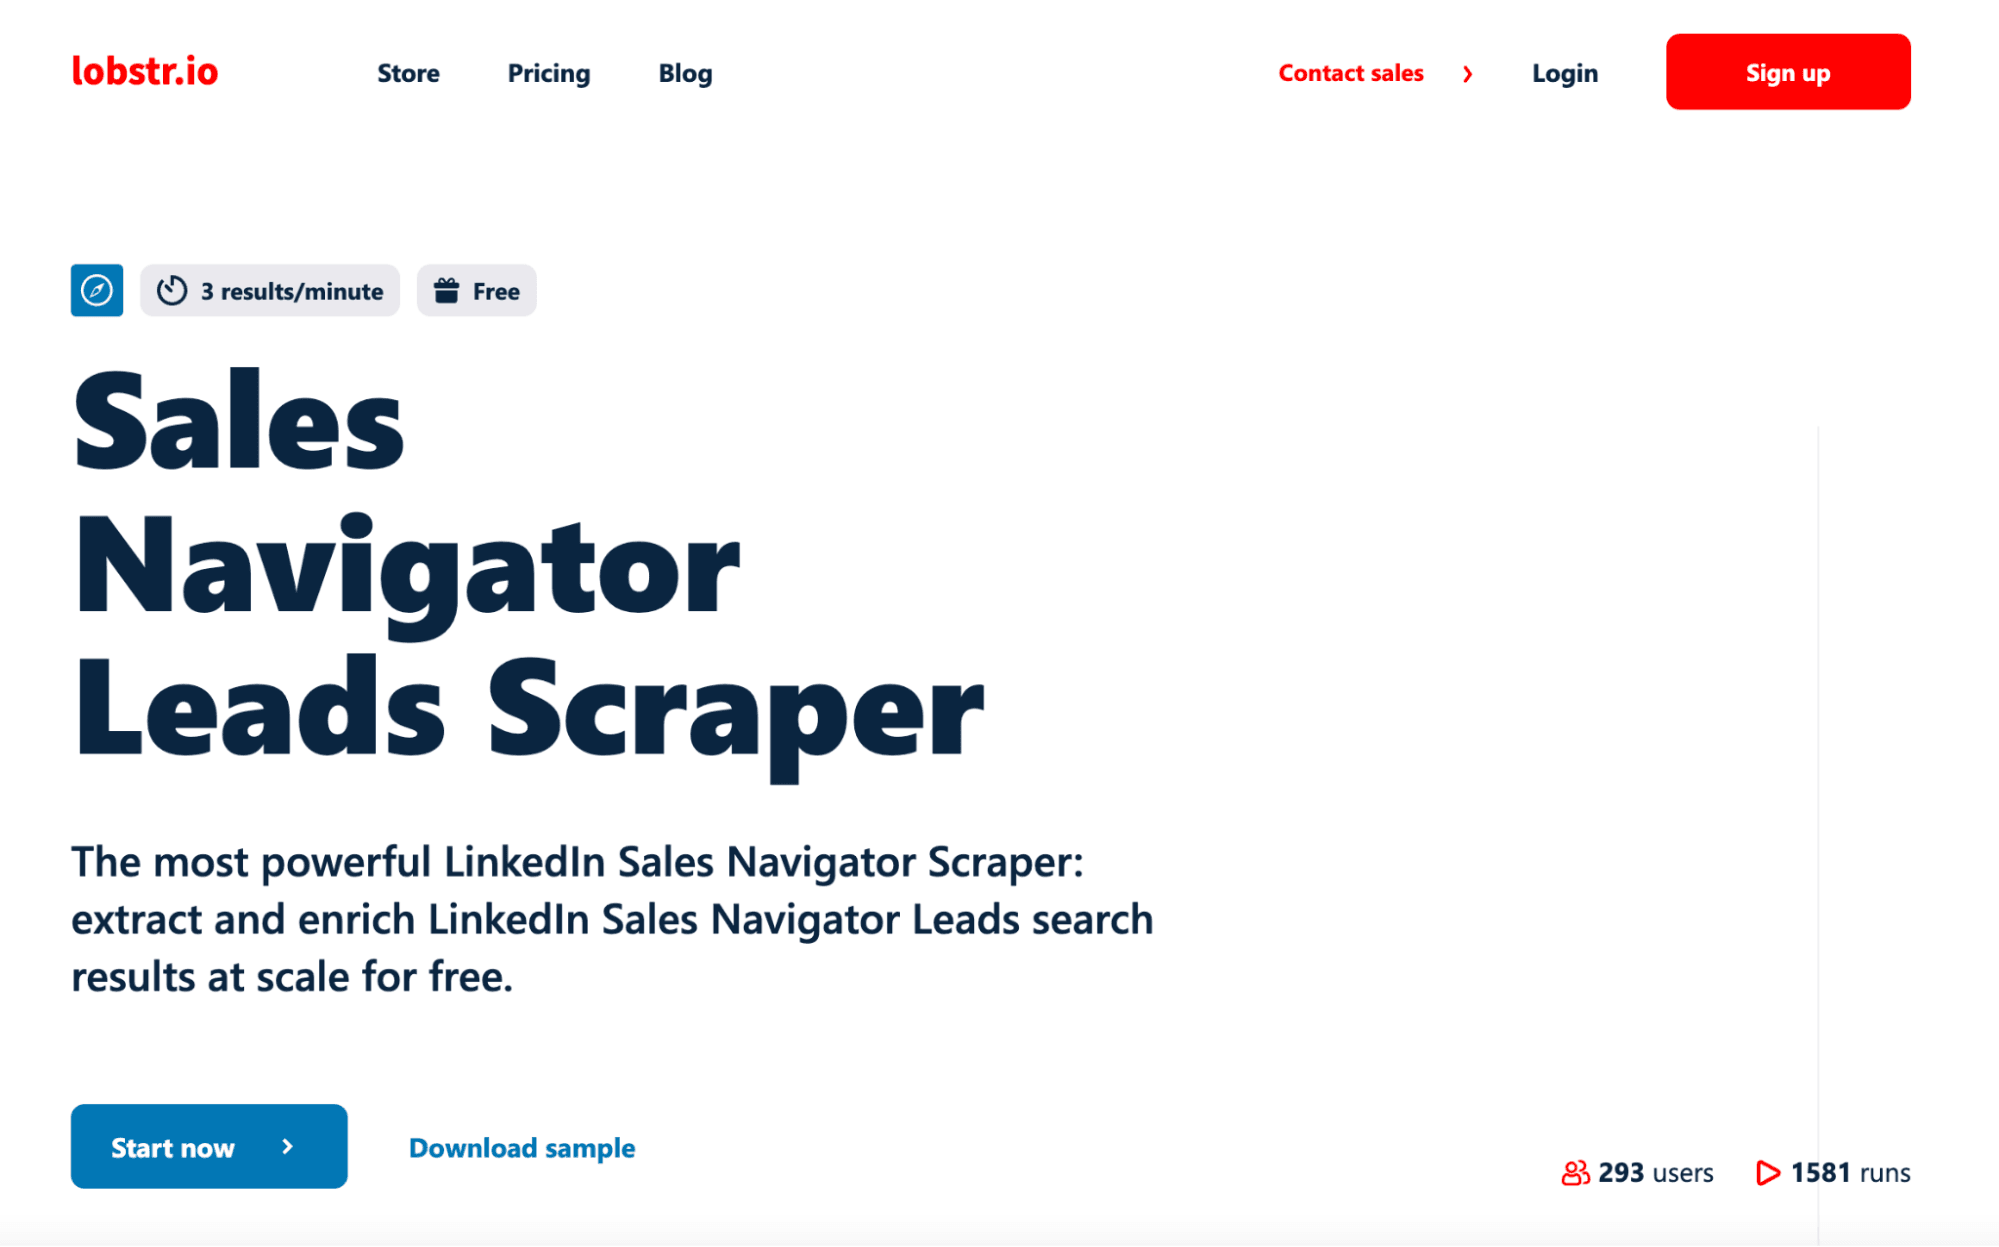 sales navigator leads scraper lobstr product page - image30.png